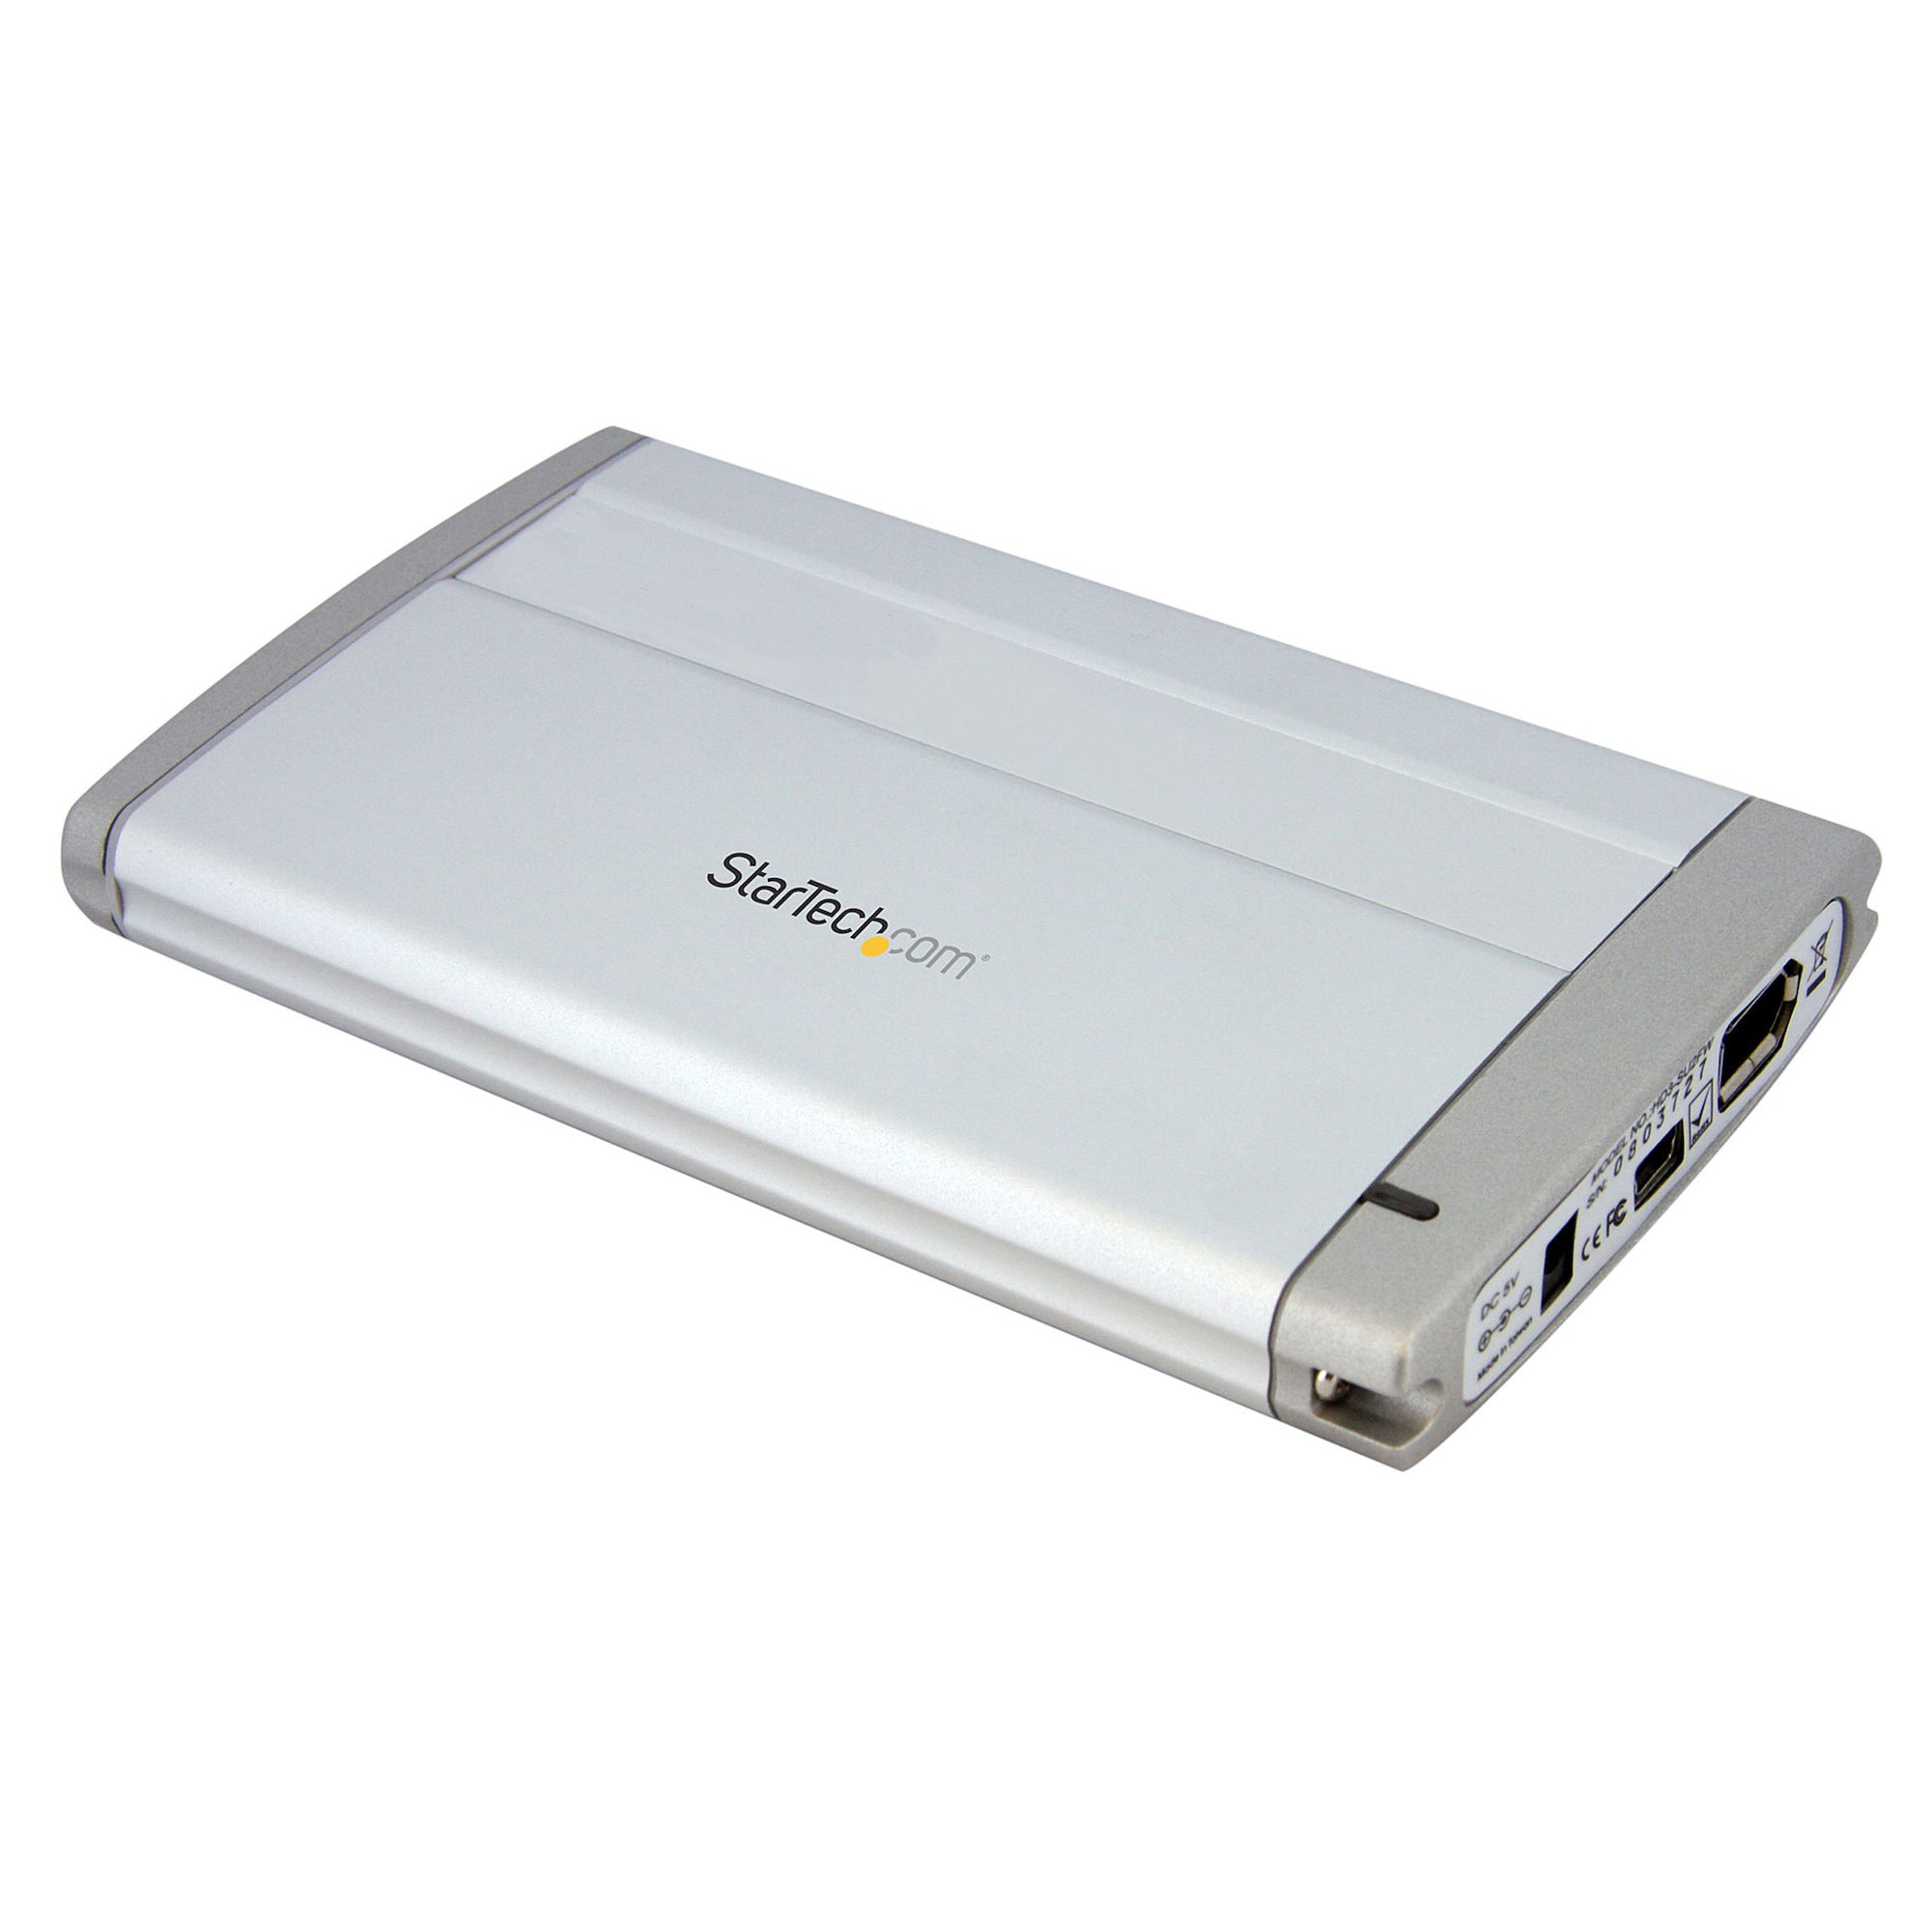 StarTech.com 2.5in Silver USB 2.0 External Hard Drive Enclosure for SATA HDD 